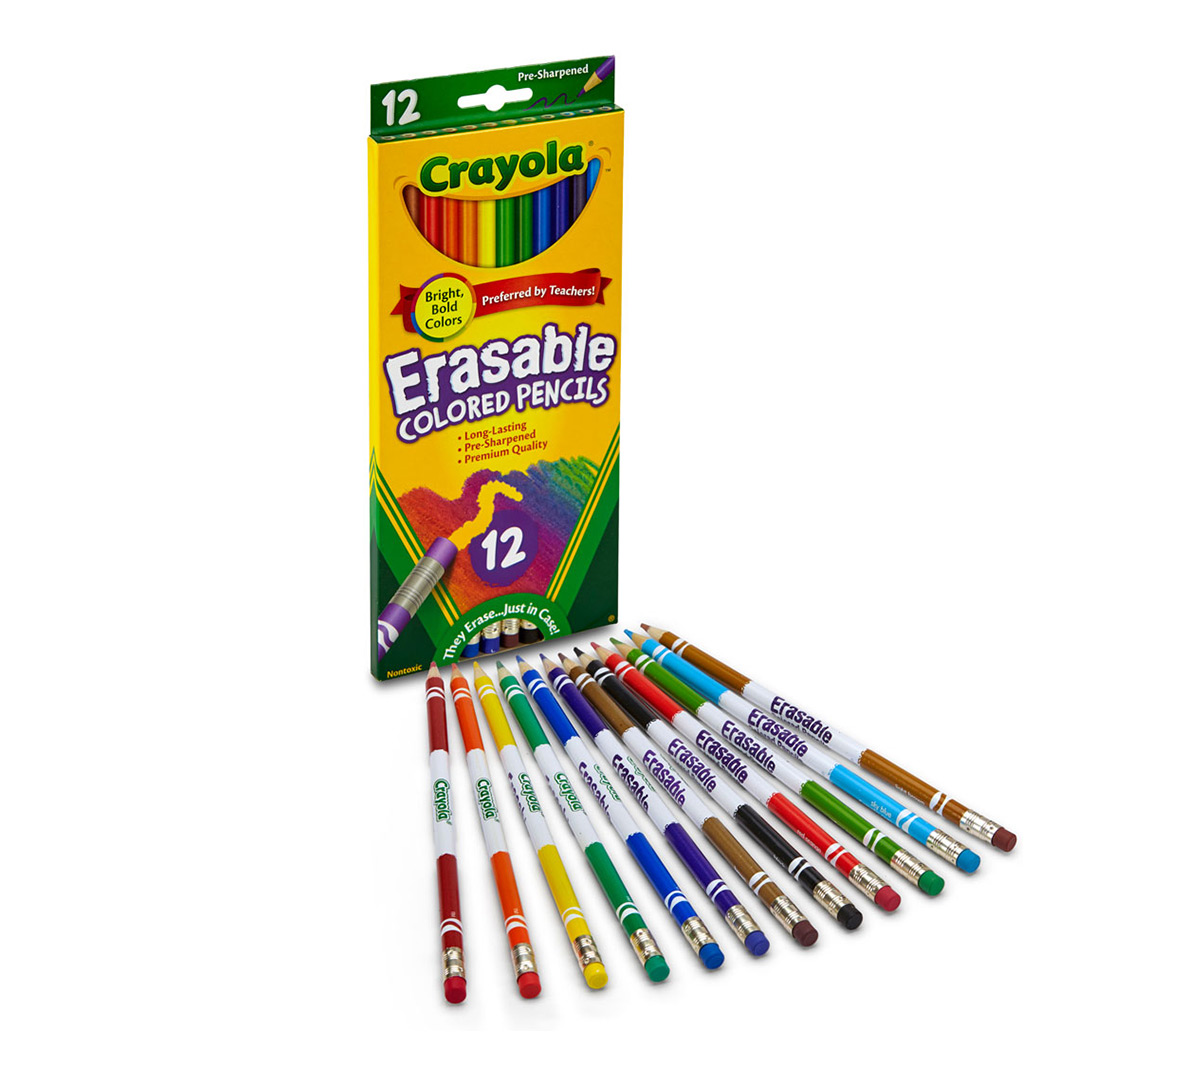 Download Crayola Erasable Colored Pencils, Assorted Colors, Art Tools for Kids, 12 Count | Crayola